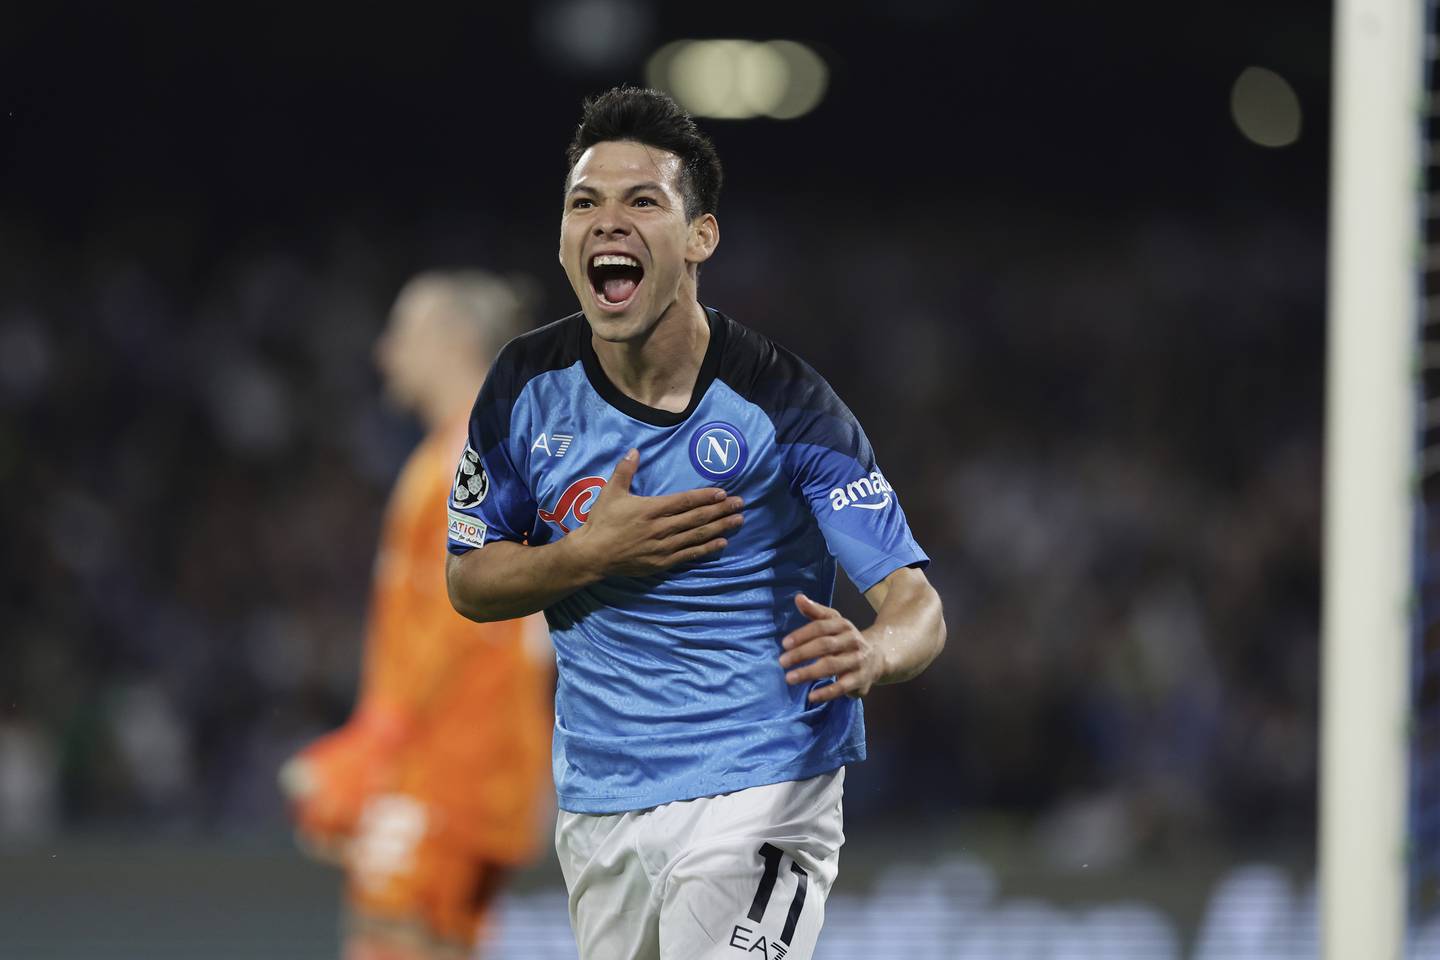 Napoli's Chucky Lozano celebrates after scoring the opening goal during a Champions League match against Ajax on Oct. 12, 2022, in Naples, Italy.